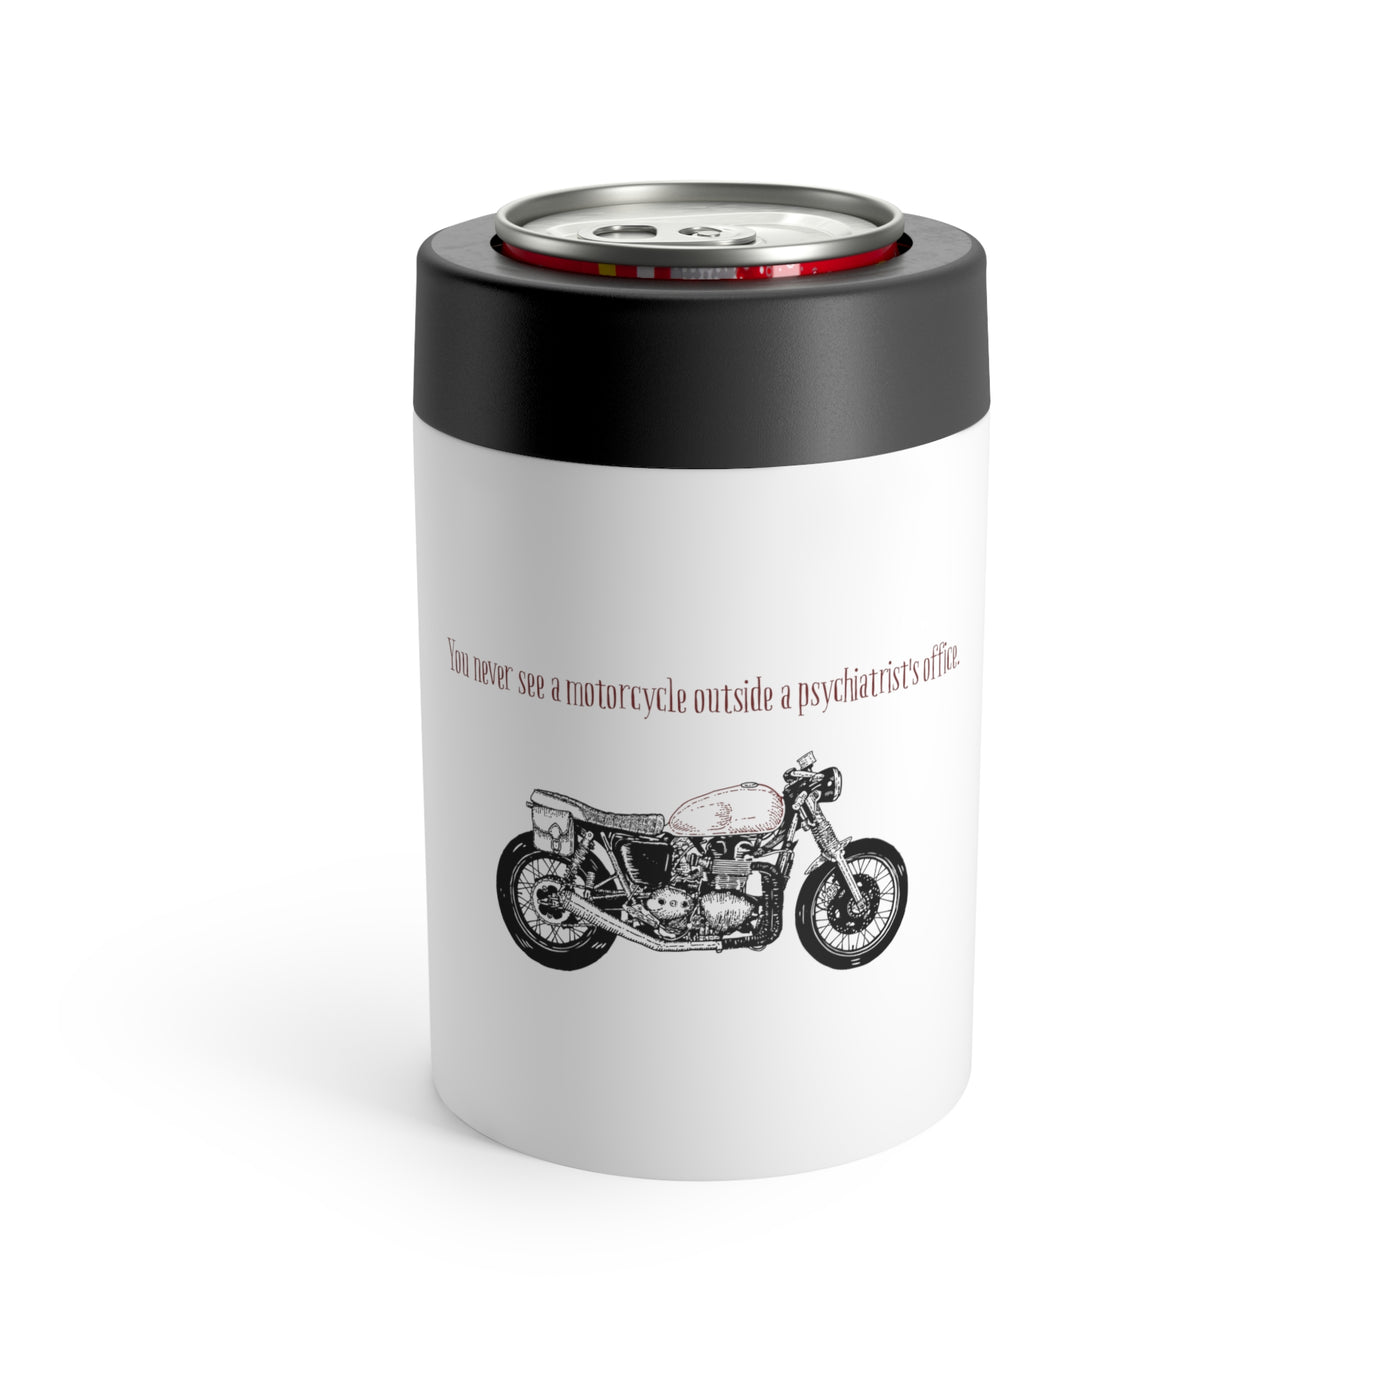 Motorcycle Outside Psychiatrist's Office Stainless Steel Can Holder